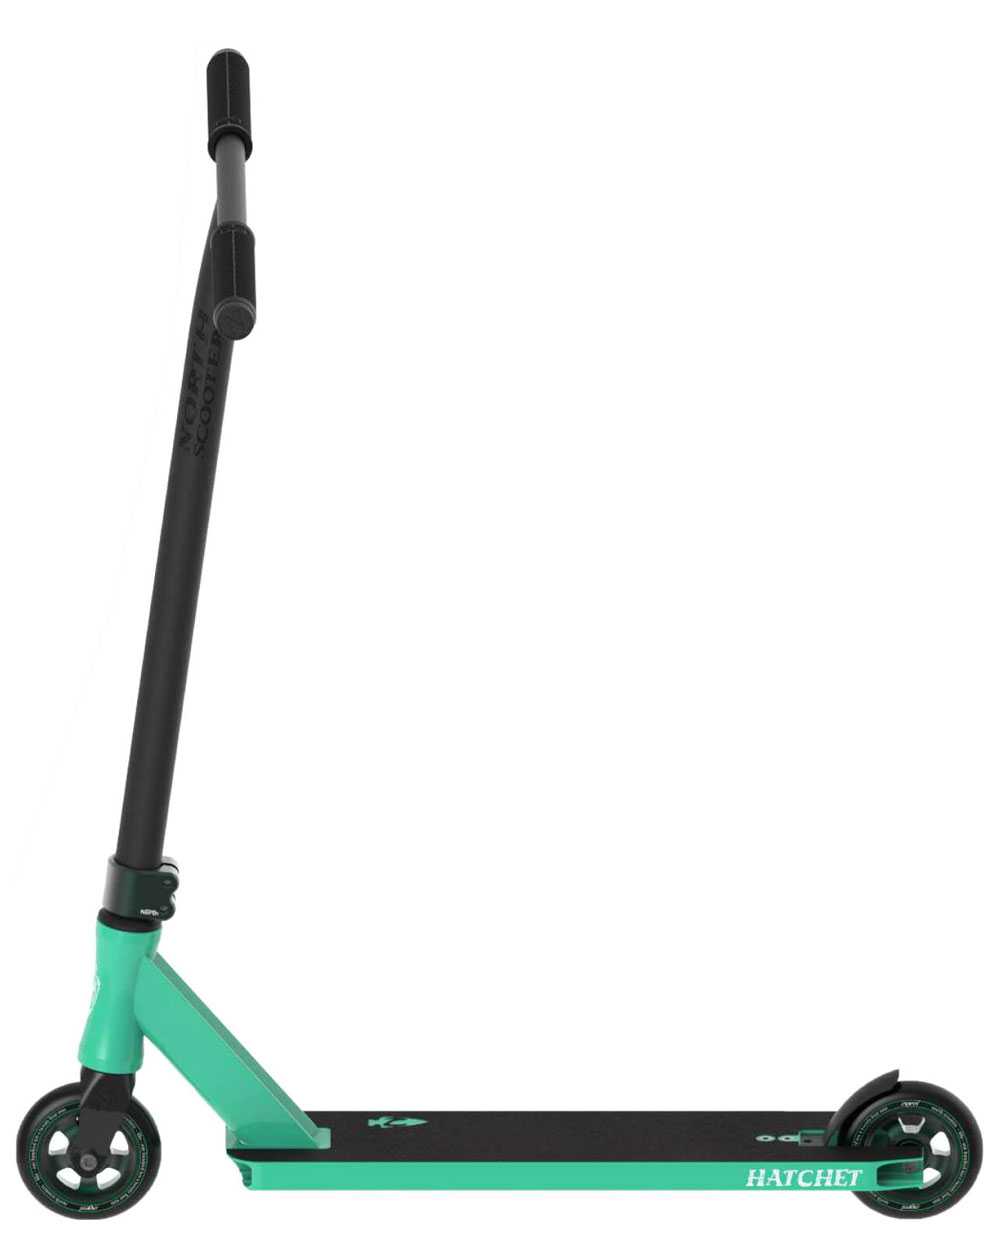 North Scooters Hatchet 2020 Stuntscooter Seafoam/Forest